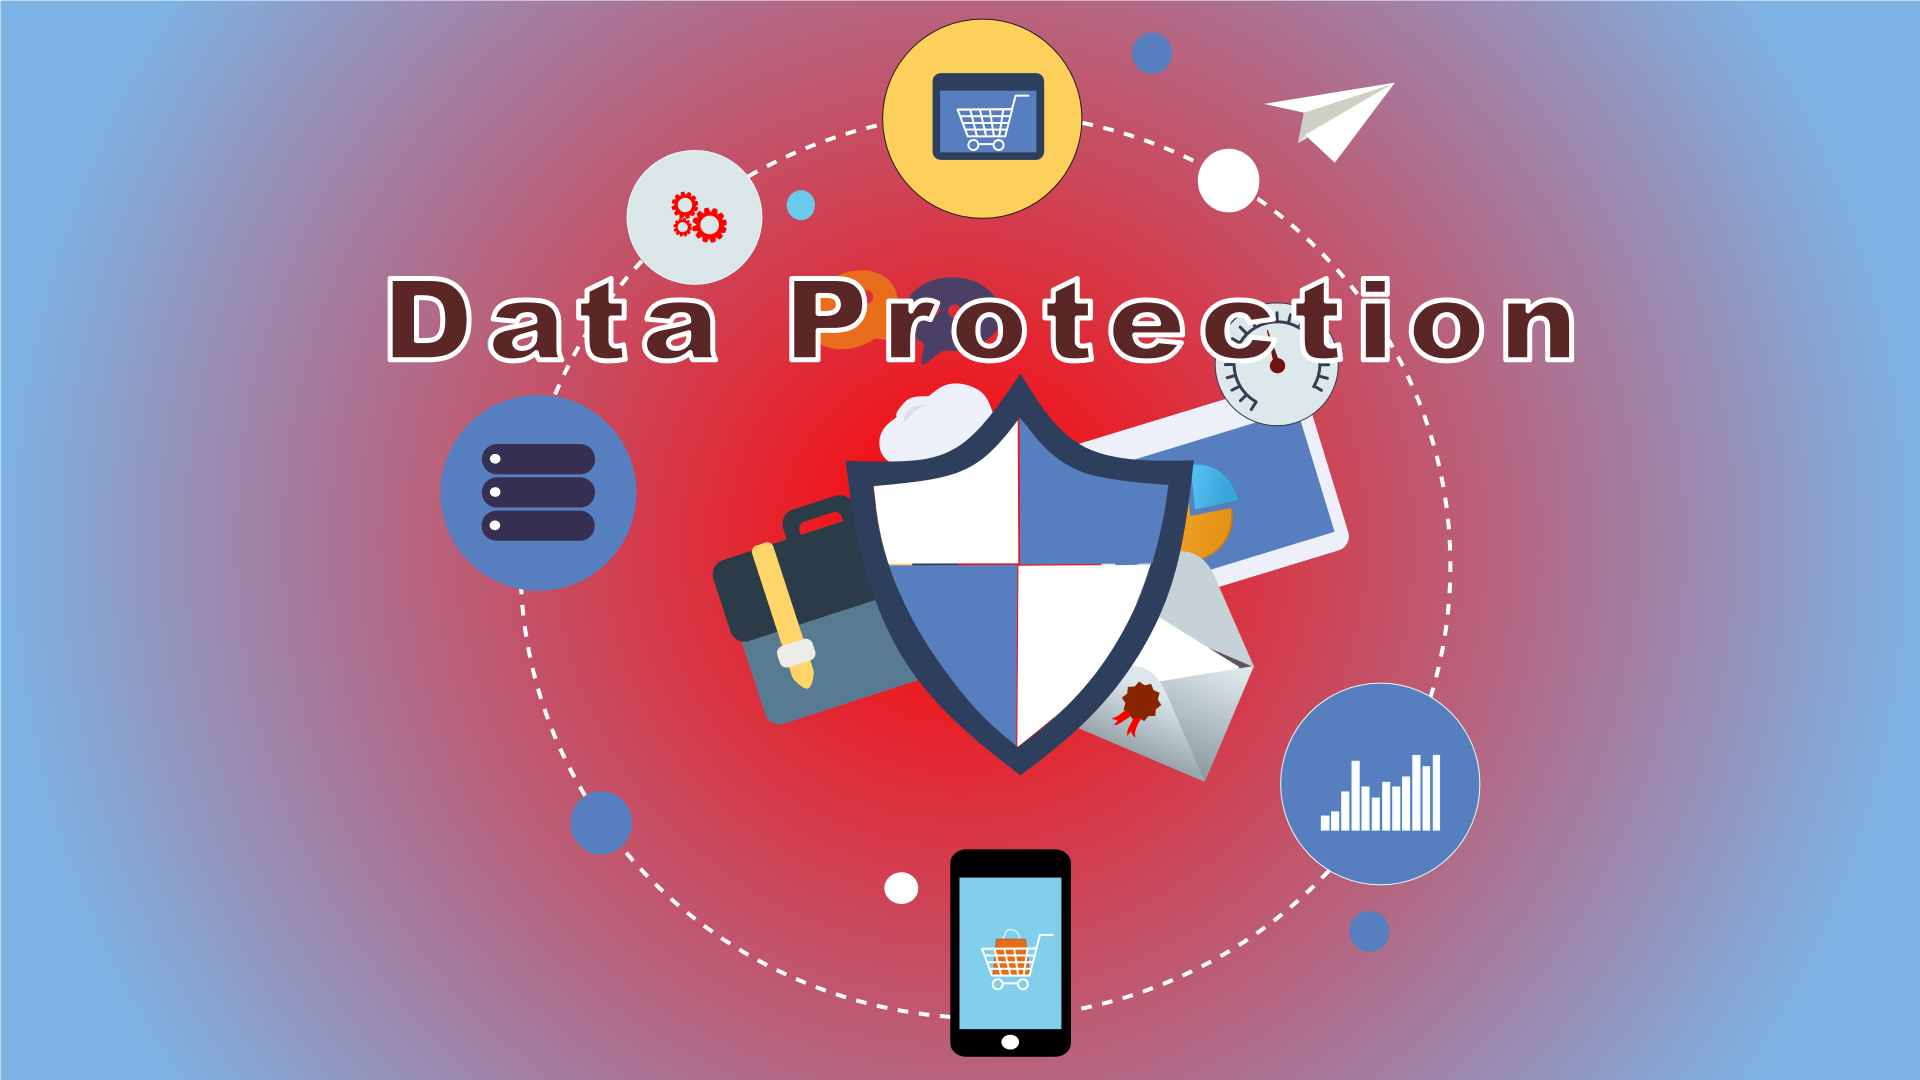 Data Protection Three Rules for the Future Safeguard your Data